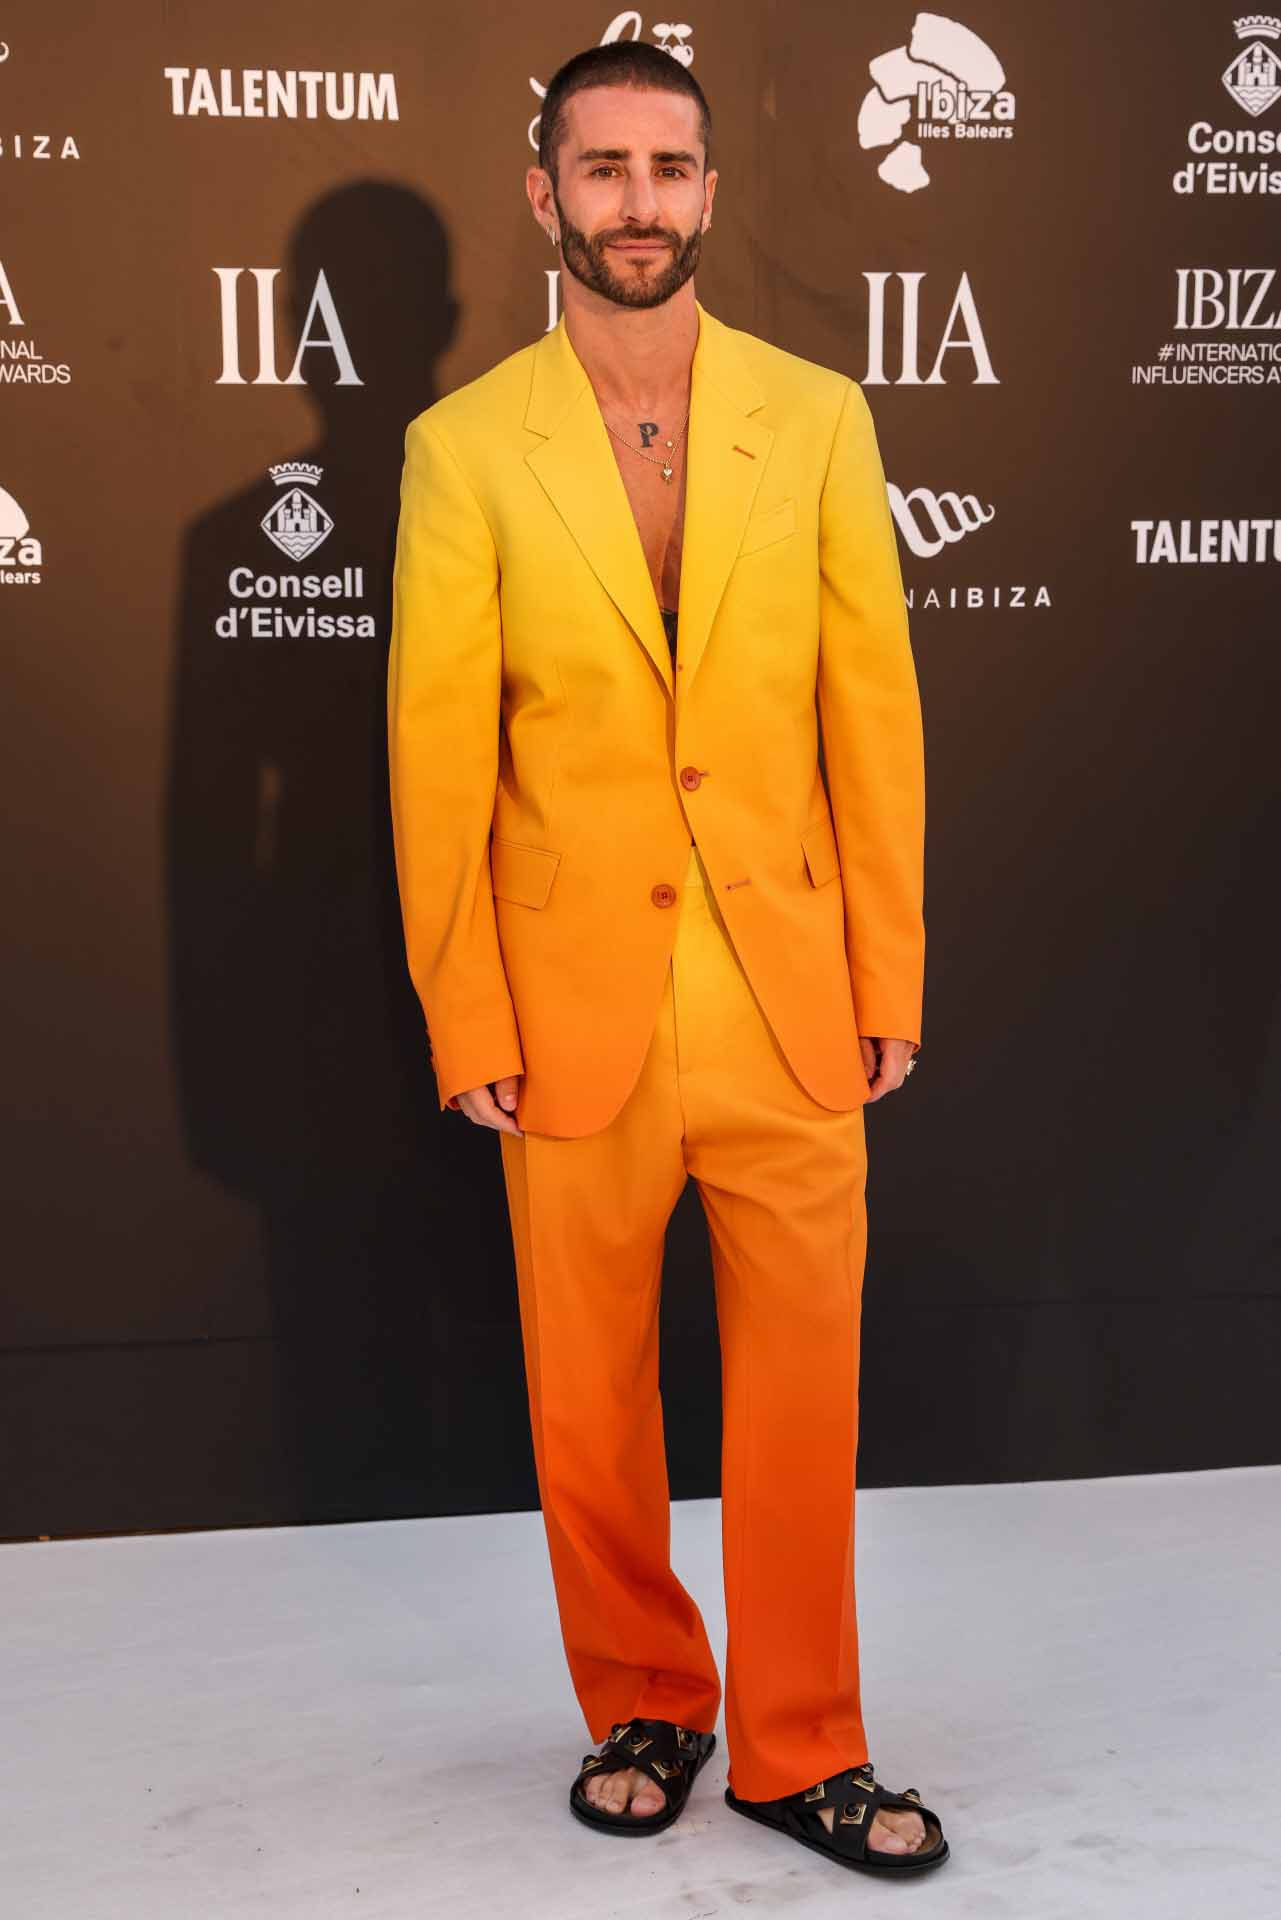 Pelayo Diaz during the first edition of the international influencers awards, in Ibiza 5 June 2022